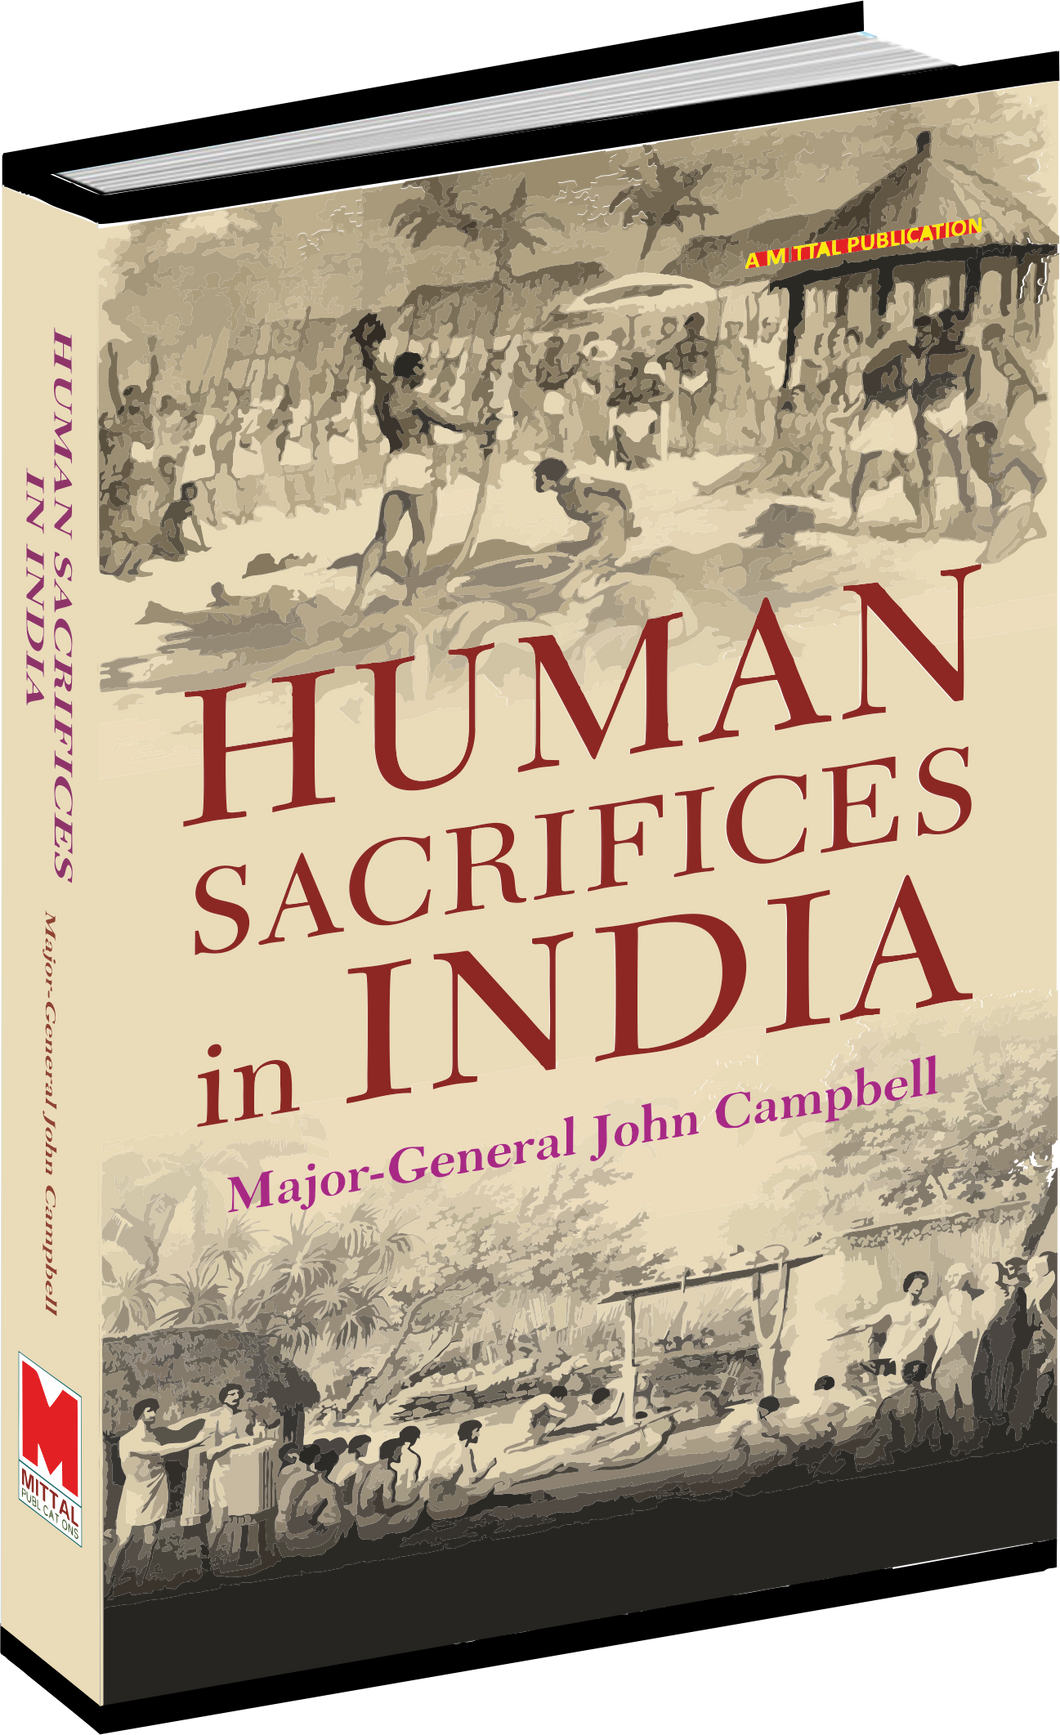 Human Sacrifices in India by Major-General JOHN Campbell with a prefatory new introduction by Prof. Binod S Das